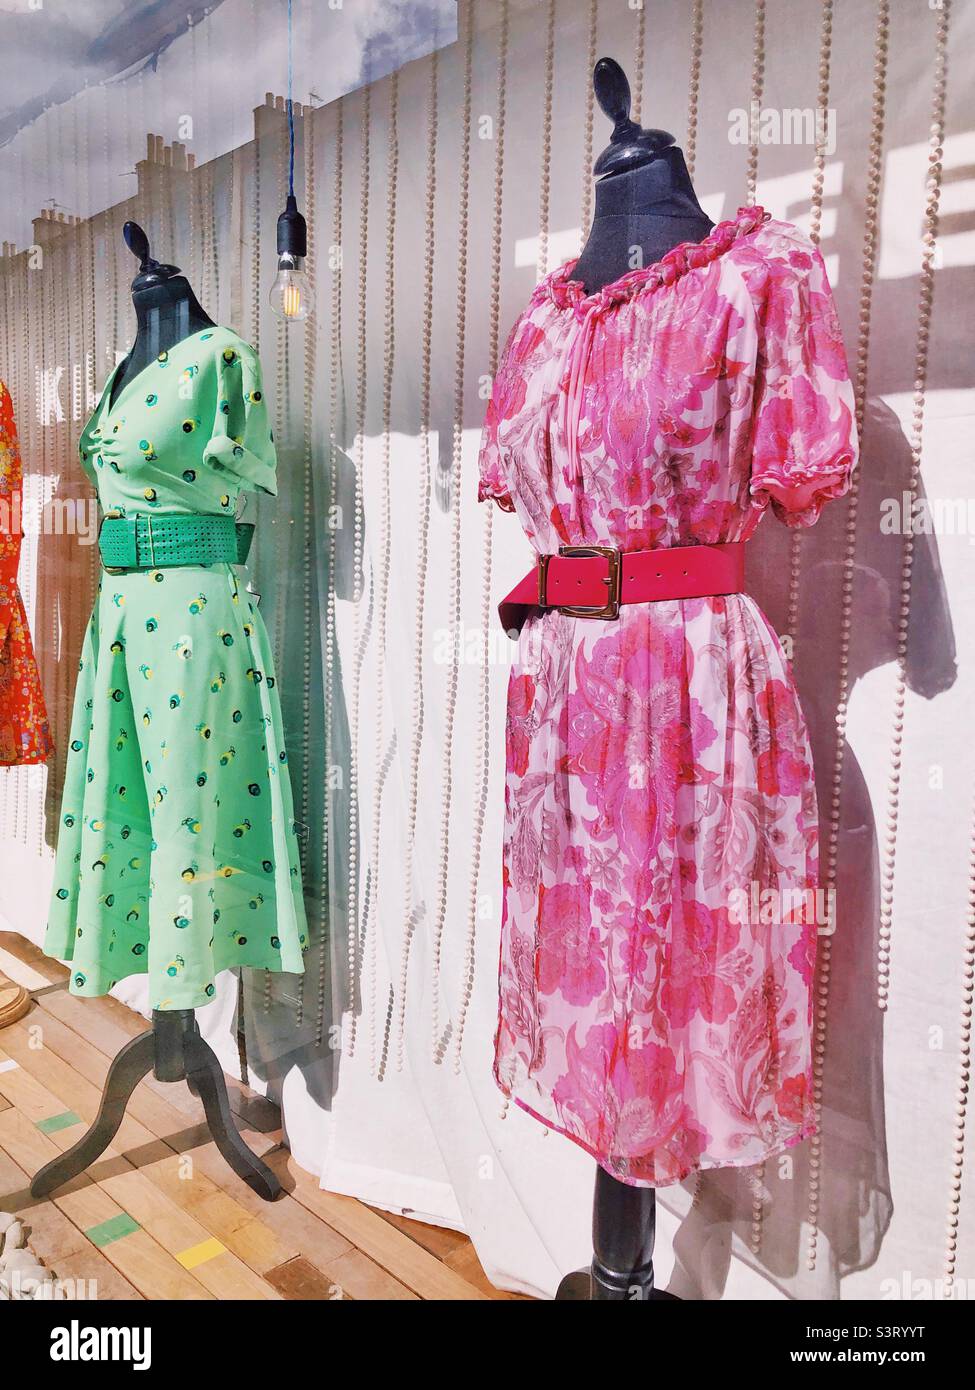 Vintage clothes from W. Armstrong & Son, Newington, Edinburgh, Scotland. Whether you are a swinging 60’s mod, a 70’s bohemian beauty, or a 90’s grungy babe, they have what you’re looking for. Stock Photo